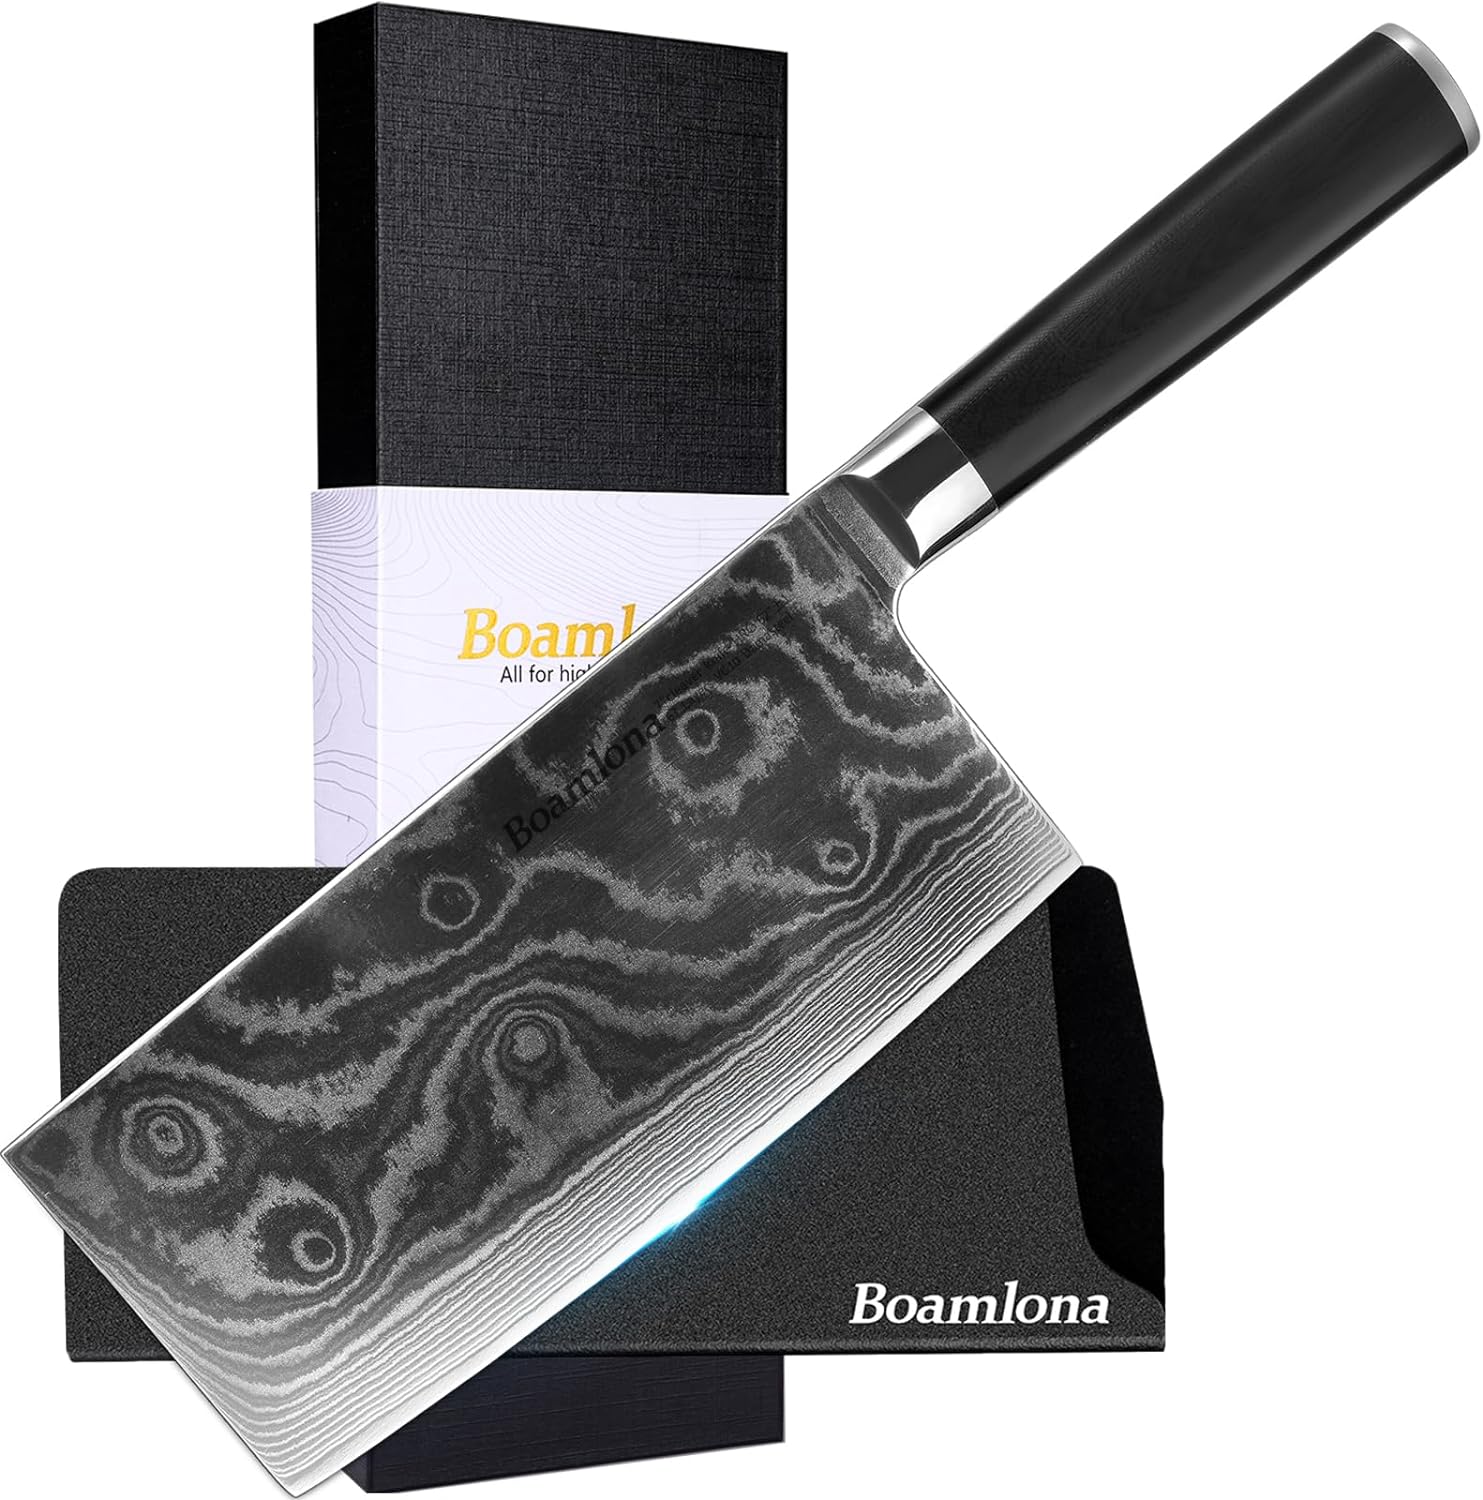 BOAMLONA Cleaver Knife 7-inch Meat Vegetable Knife Japanese VG10 Steel Core Damascus Kitchen Chopping Knife/w Sheath - Ergonomic Full Tang G10 Handle - with Sheath and GiftBox